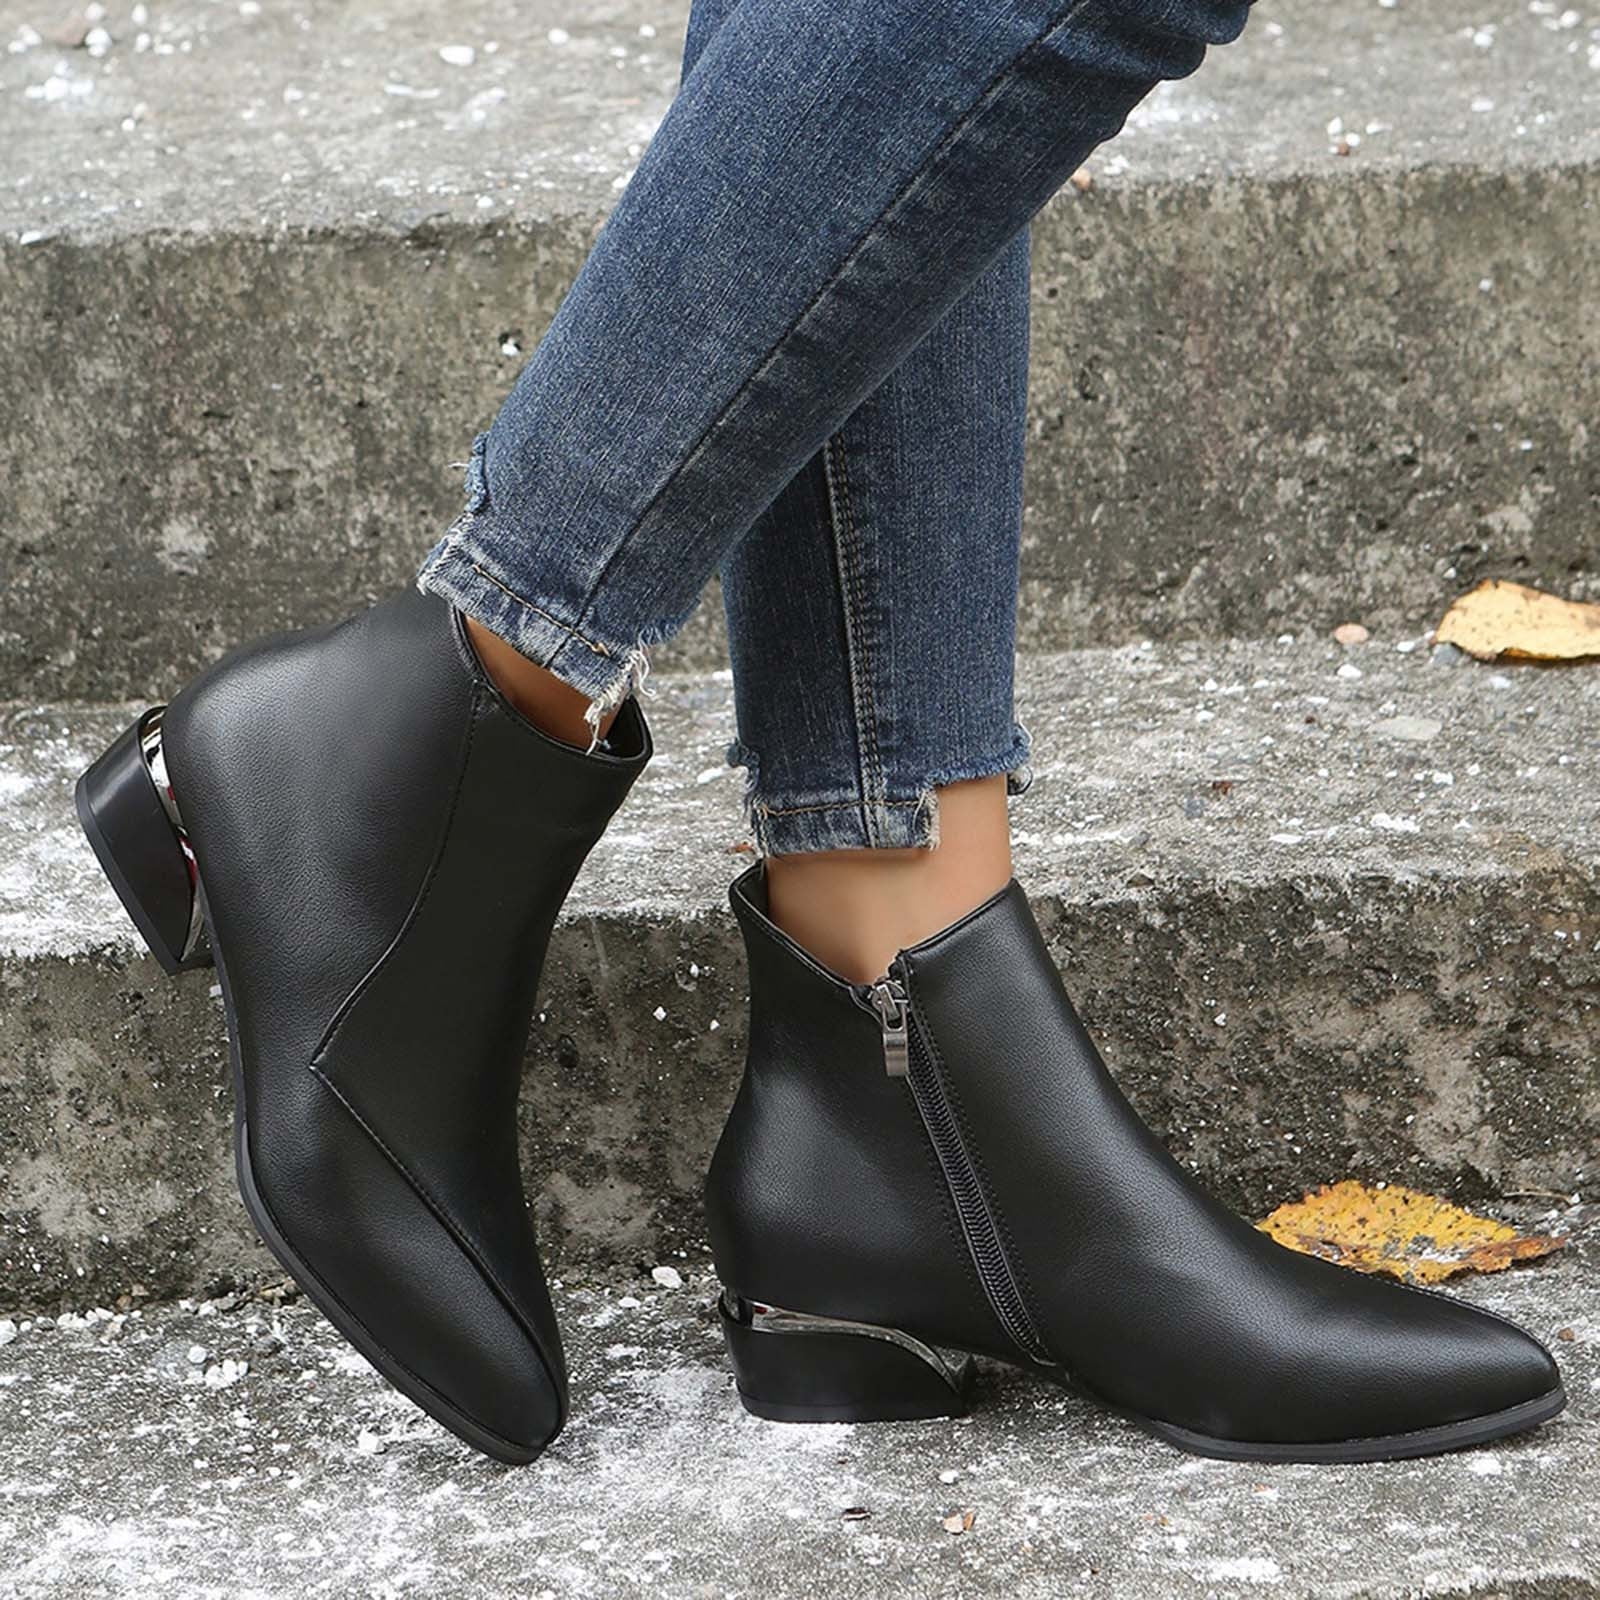 OFFICE Approval Low Square Toe Boots Black Leather - Women's Ankle Boots